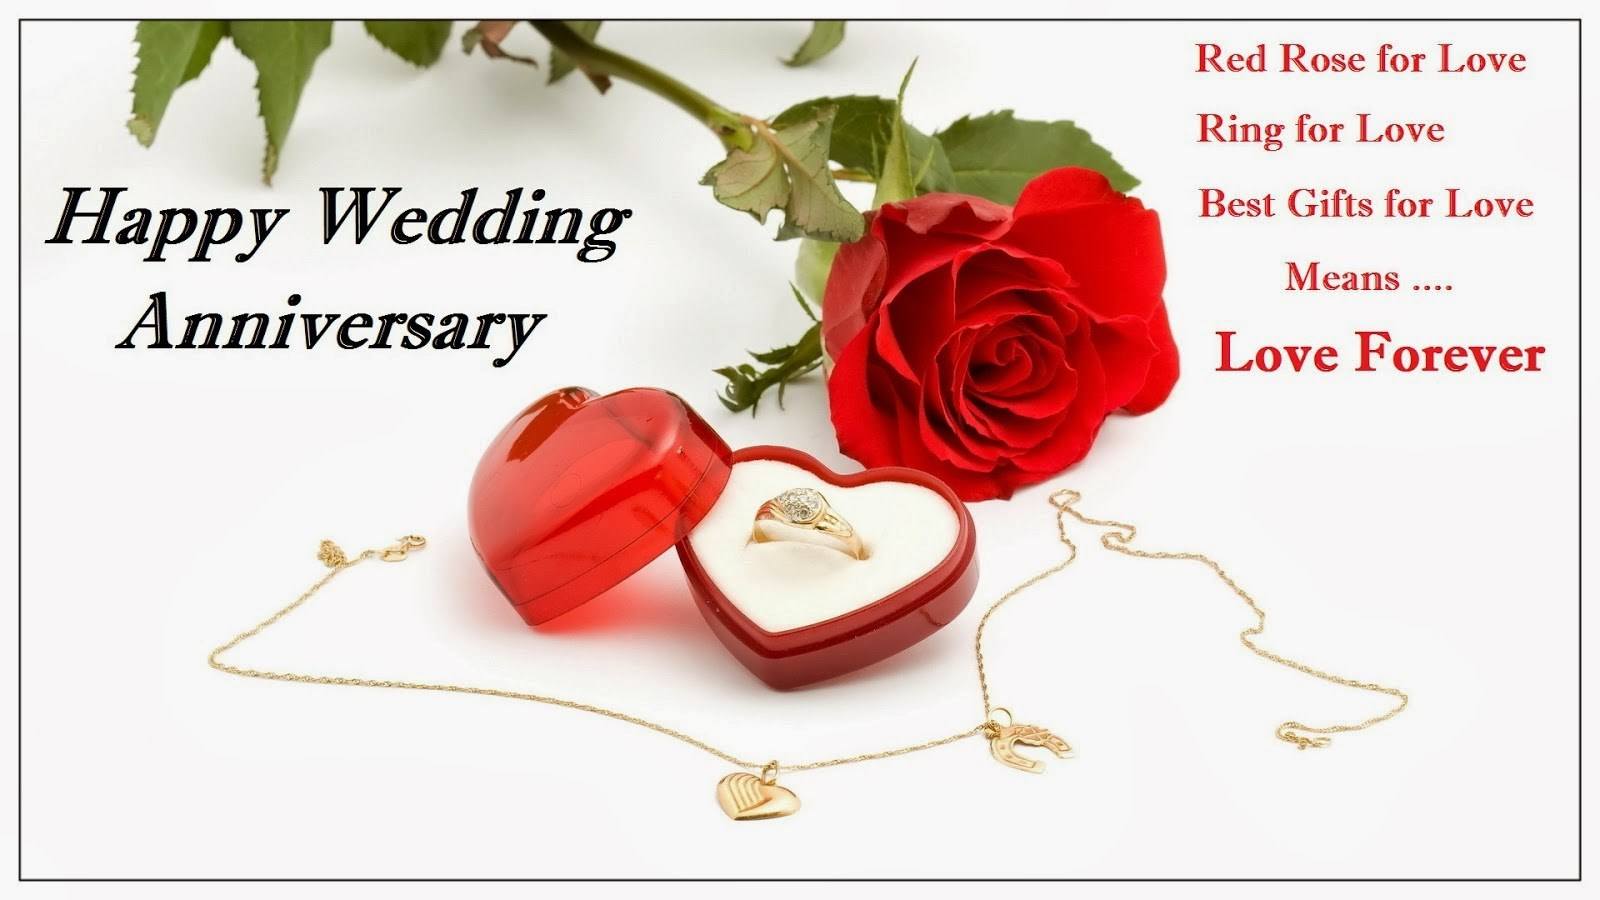 Happy Wedding Anniversary Wishes, SMS & Messages For Couples/Friends